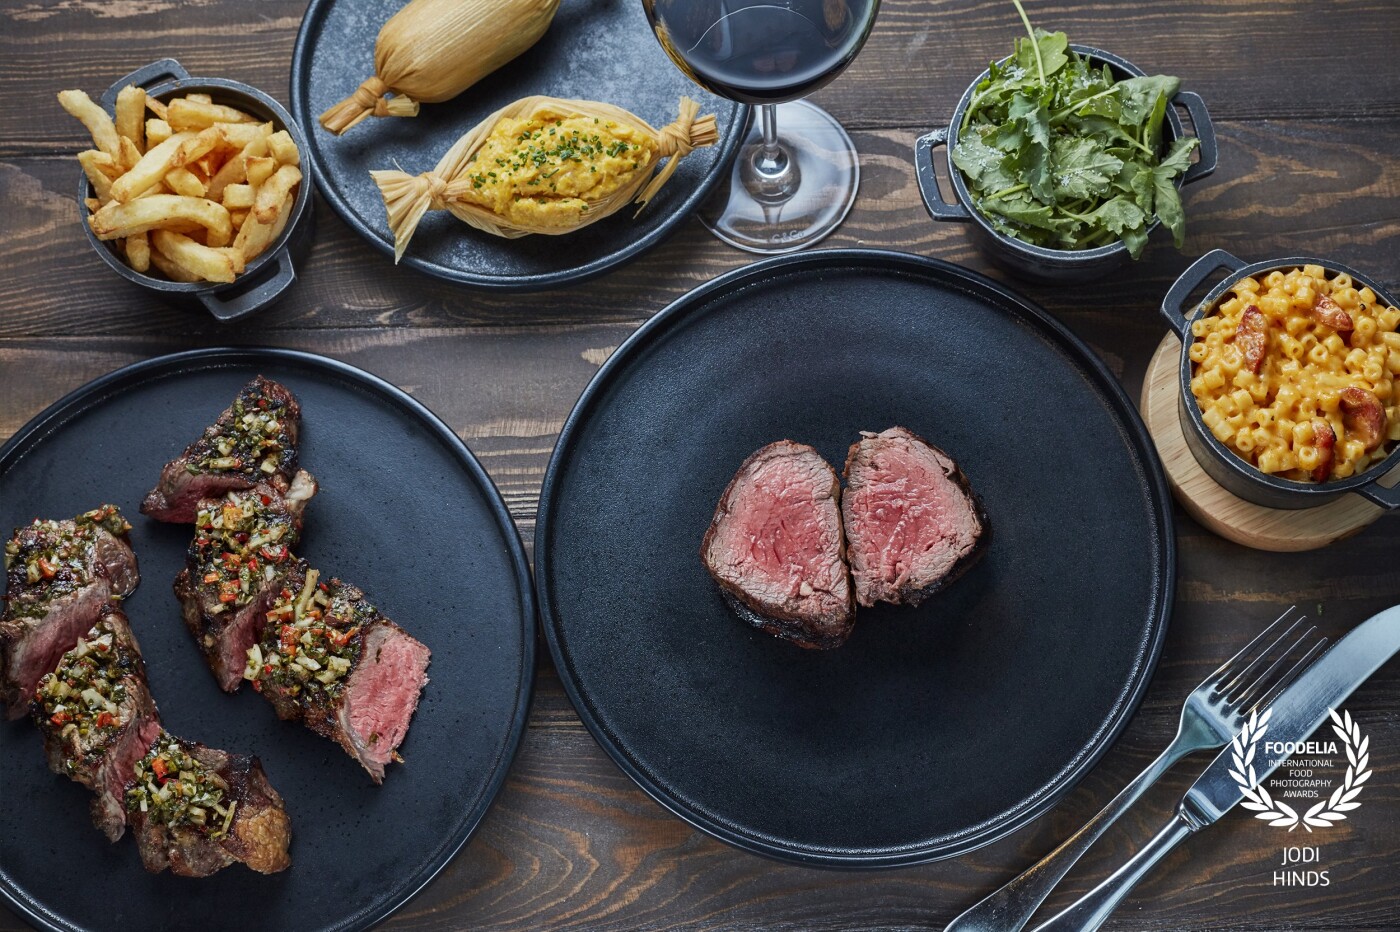 New menu shot at Gaucho - the Argentine steak restaurant group in the UK and Dubai. This is a selection of their steaks: <br />
CHATEAUBRIAND - centre cut of lomo, slow grilled, <br />
TIRA DE ANCHO - spiral cut, slow grilled with chimichurri, <br />
MAC & CHEESE - Spanish chorizo and ‘nduja, <br />
HUMITA SALTEÑA - served in a corn husk with sweetcorn and mozzarella.<br />
Perfect with a glass of red!<br />
Restaurant: @gauchogroup<br />
Owner: @martinwilliams32<br />
Photographer: @jodihindsphoto